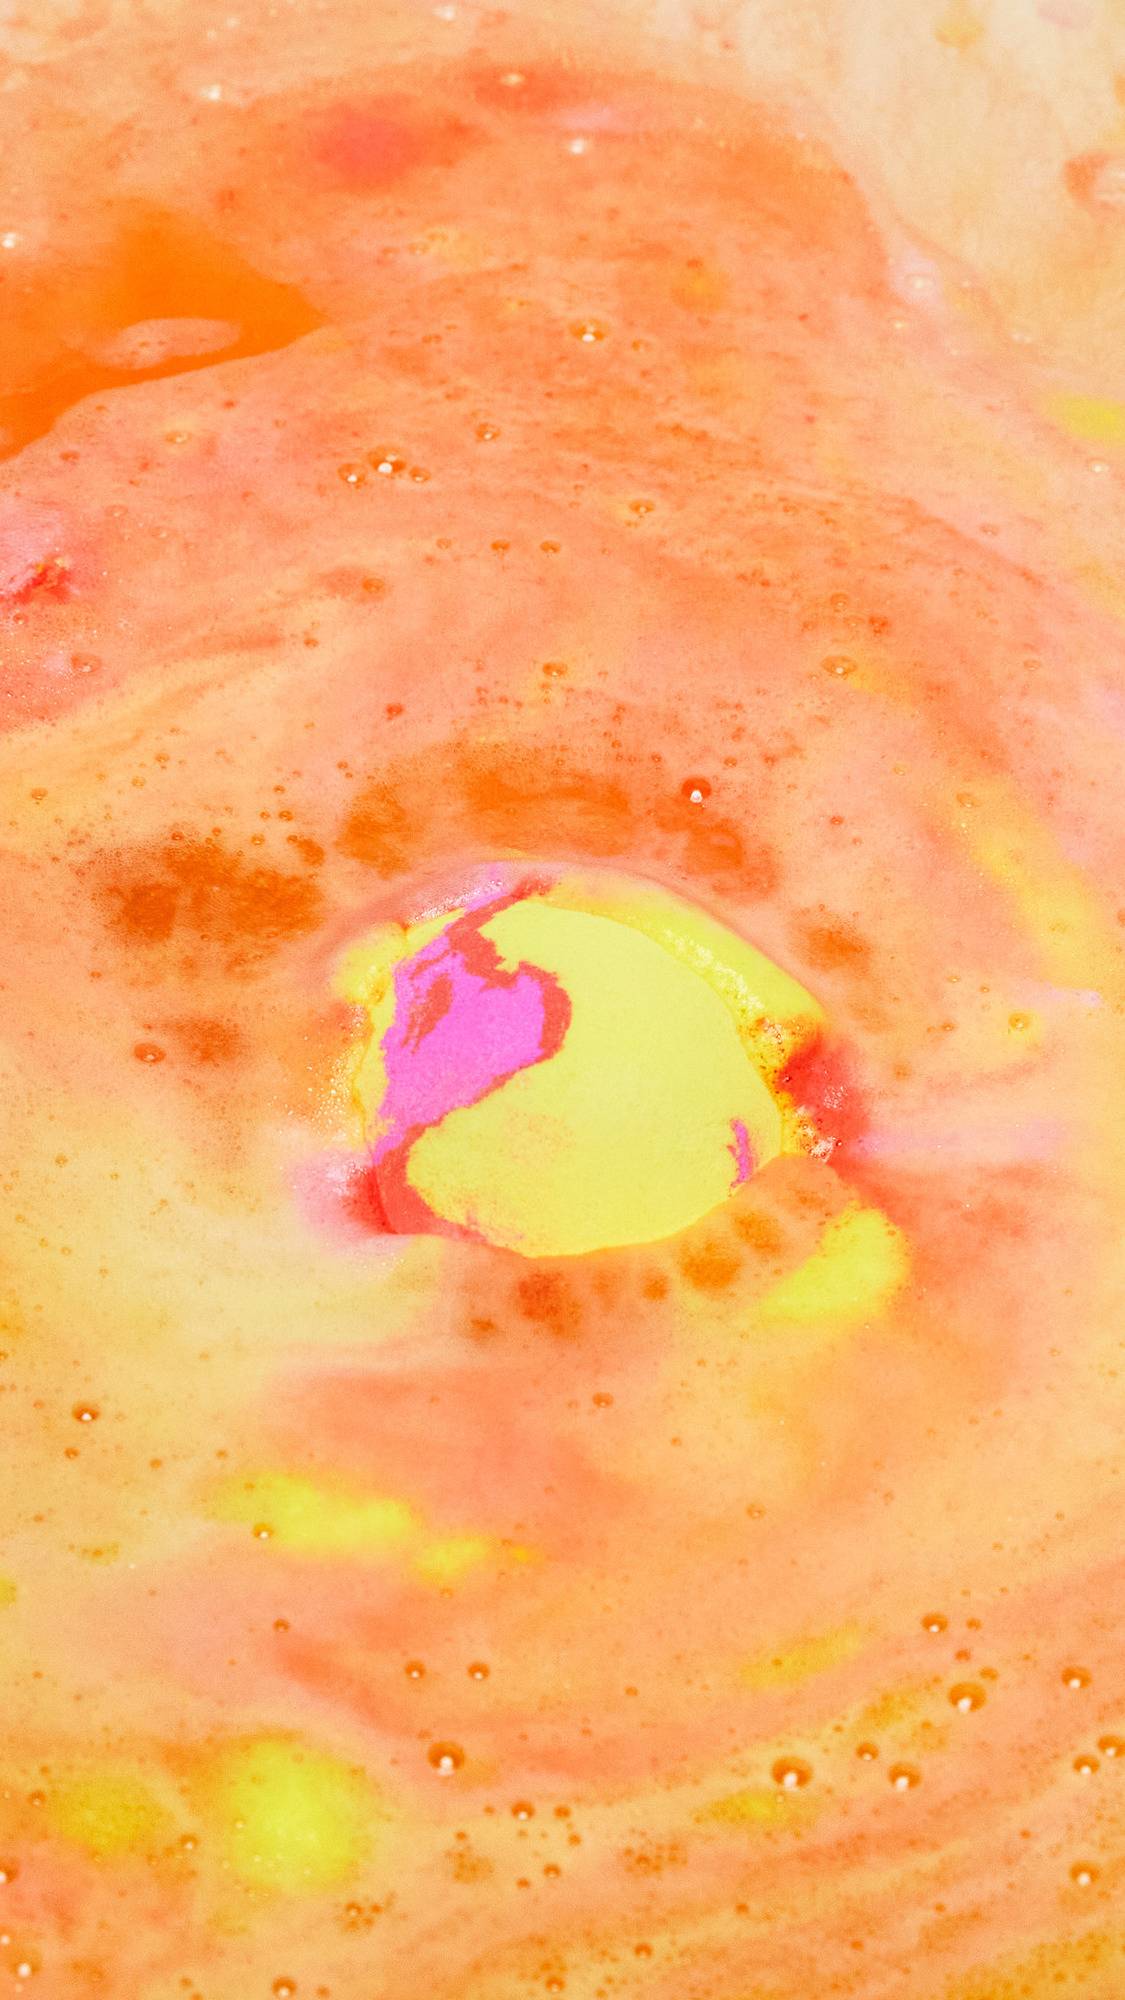 The Passion bath bomb is slowly dissolving creating swirling ripples of yellow, pink and orange. 